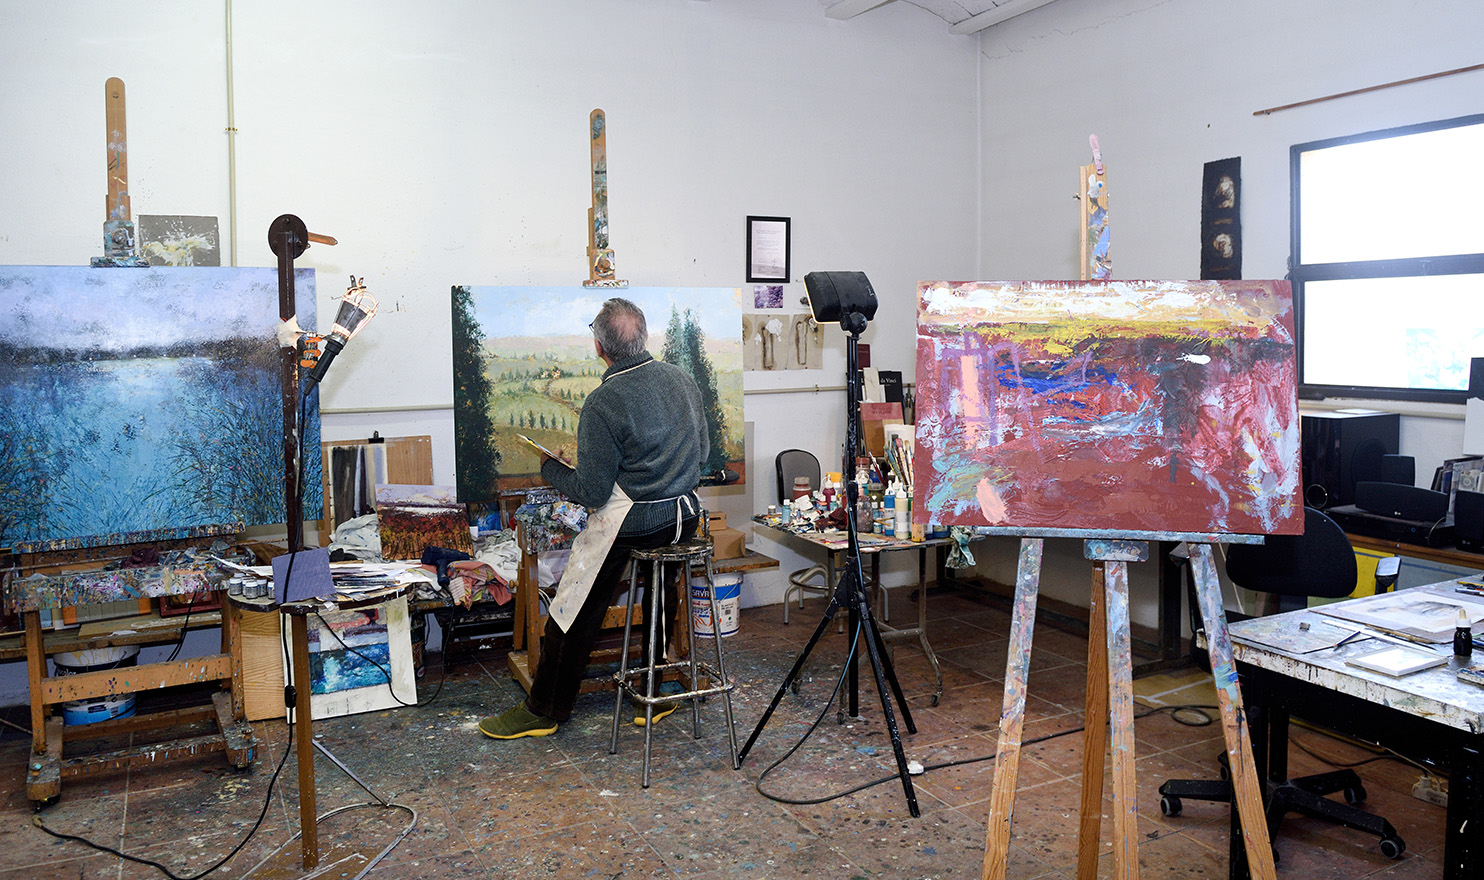 An artist has his back to the camera as he sits on a stool in an art studio and works on a landscape painting, with two empty easels beside him.